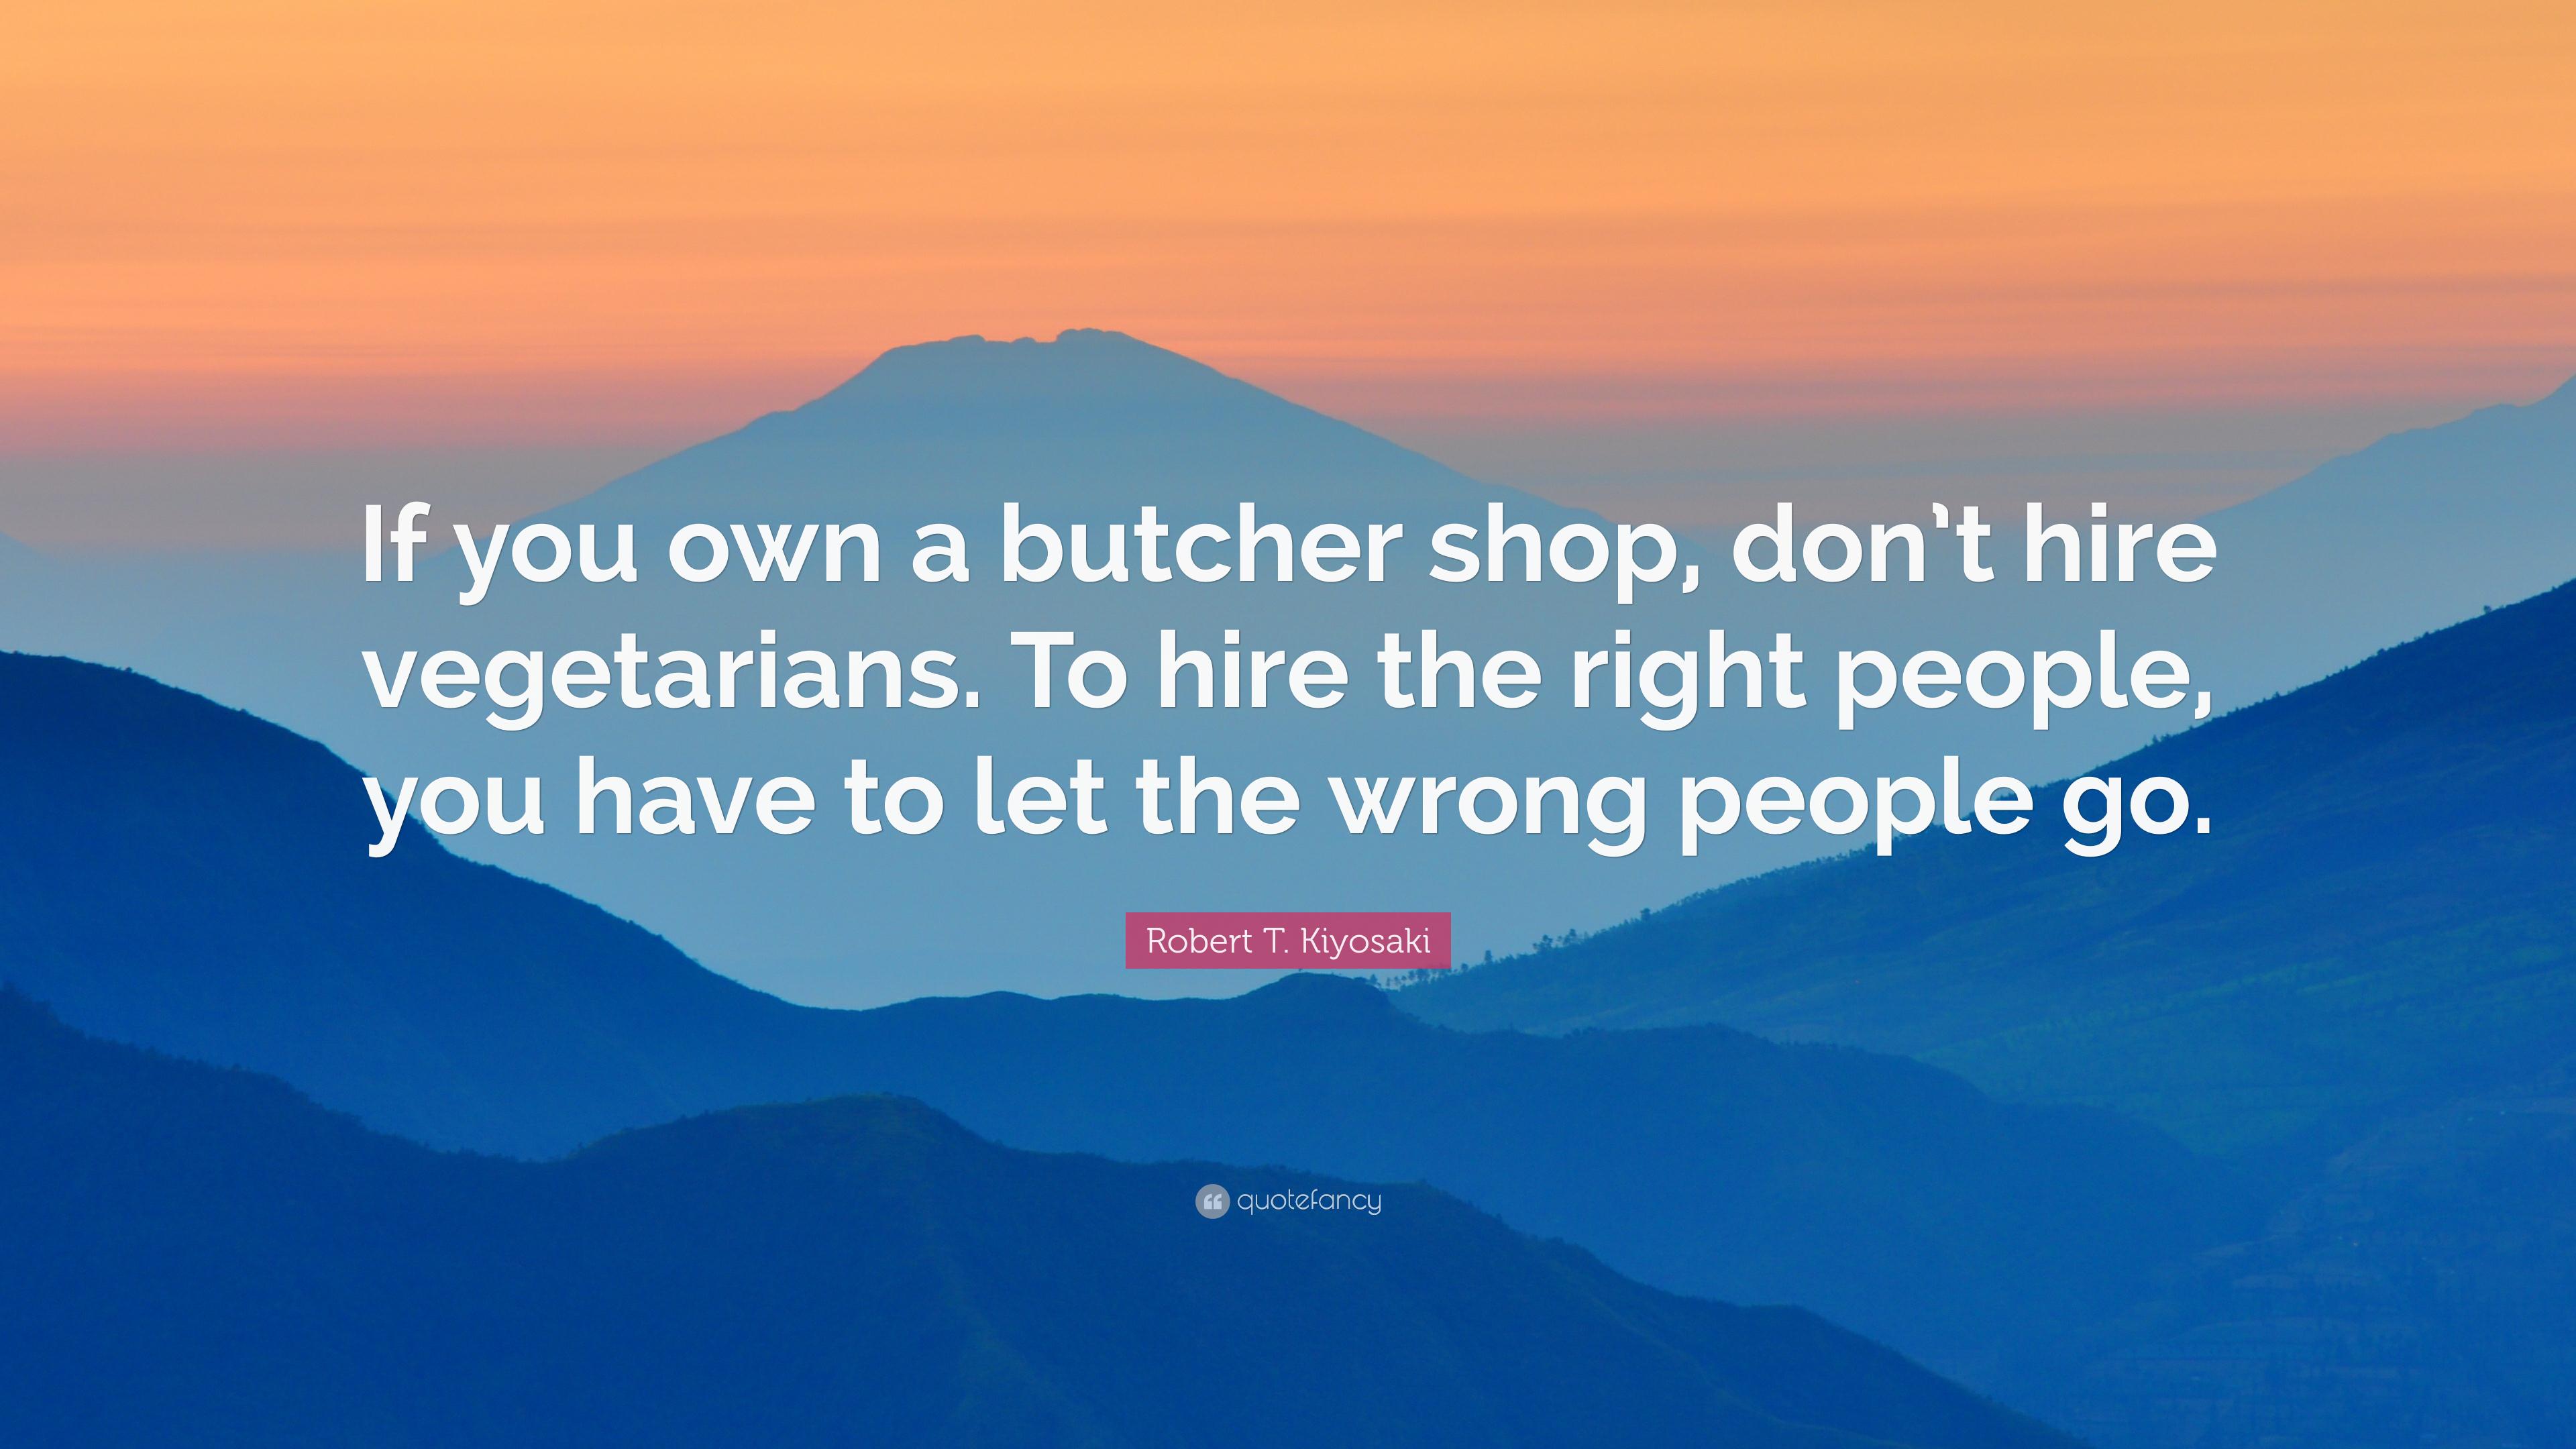 Robert T. Kiyosaki Quote: “If you own a butcher shop, don't hire